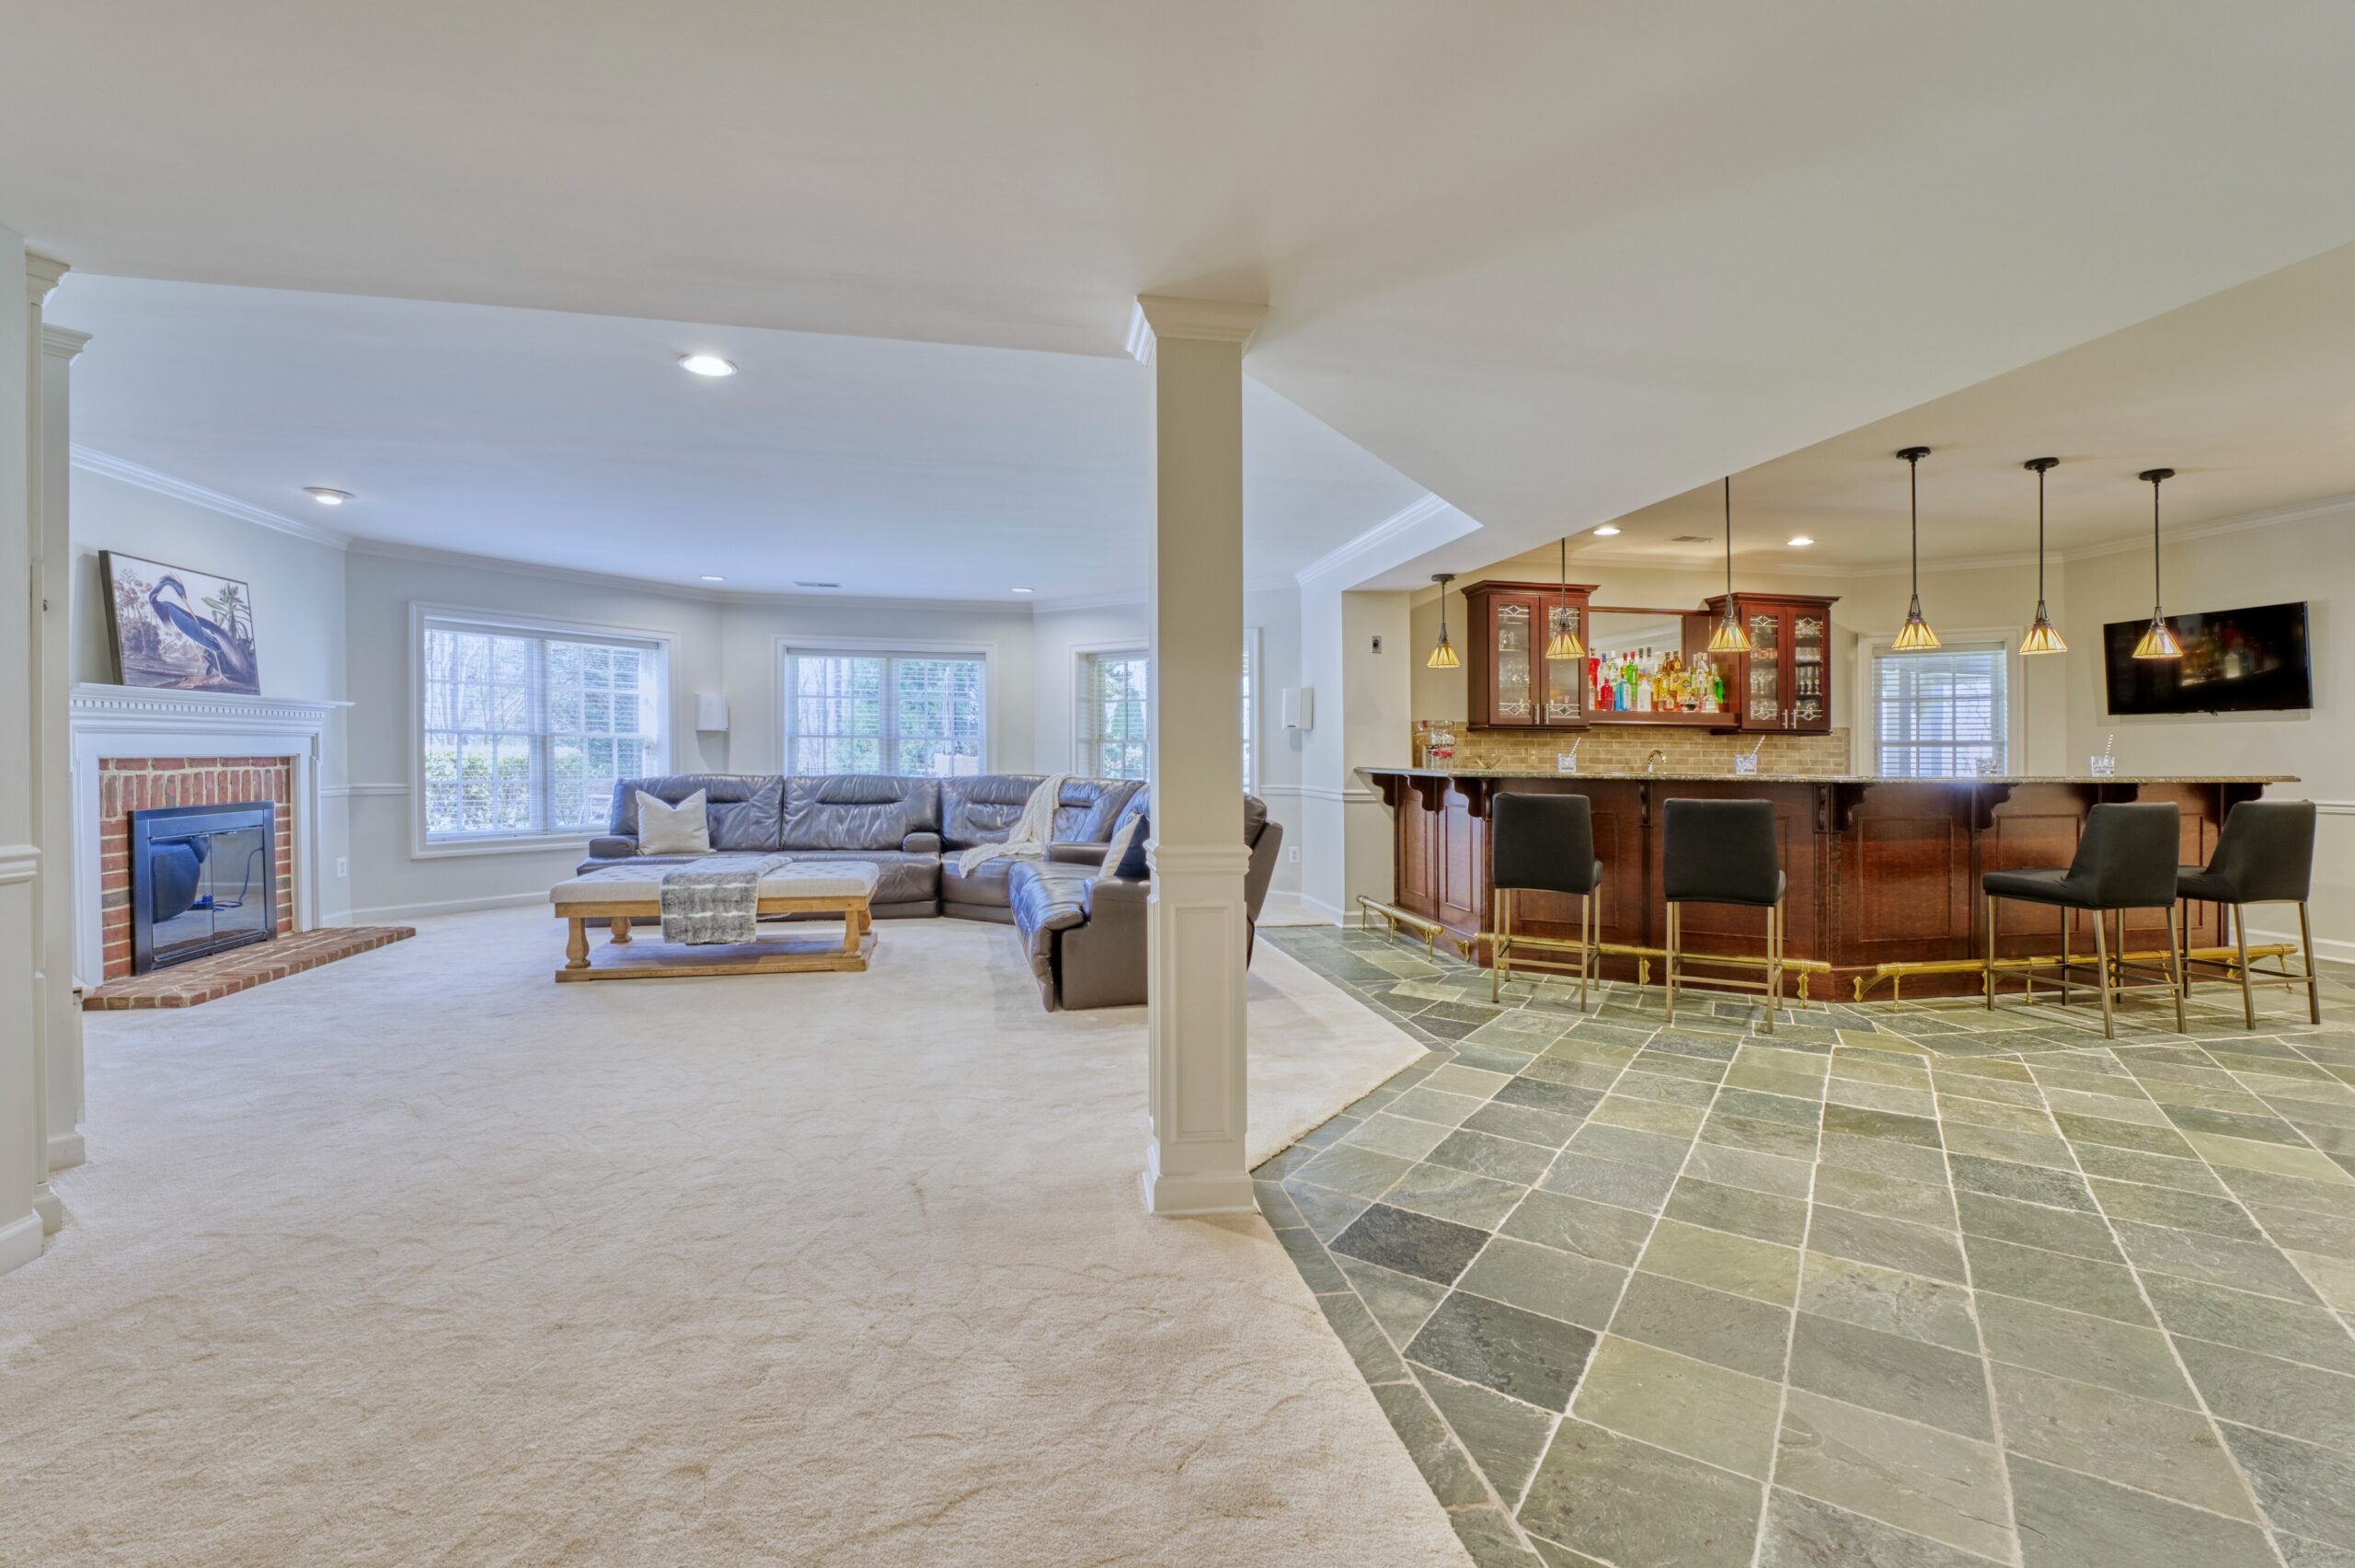 Professional interior photo of 17087 Bold Venture Drive, Leesburg - showing the finished basement with a large bar area to the right and carpeted media area to the left - perfect for gameday!